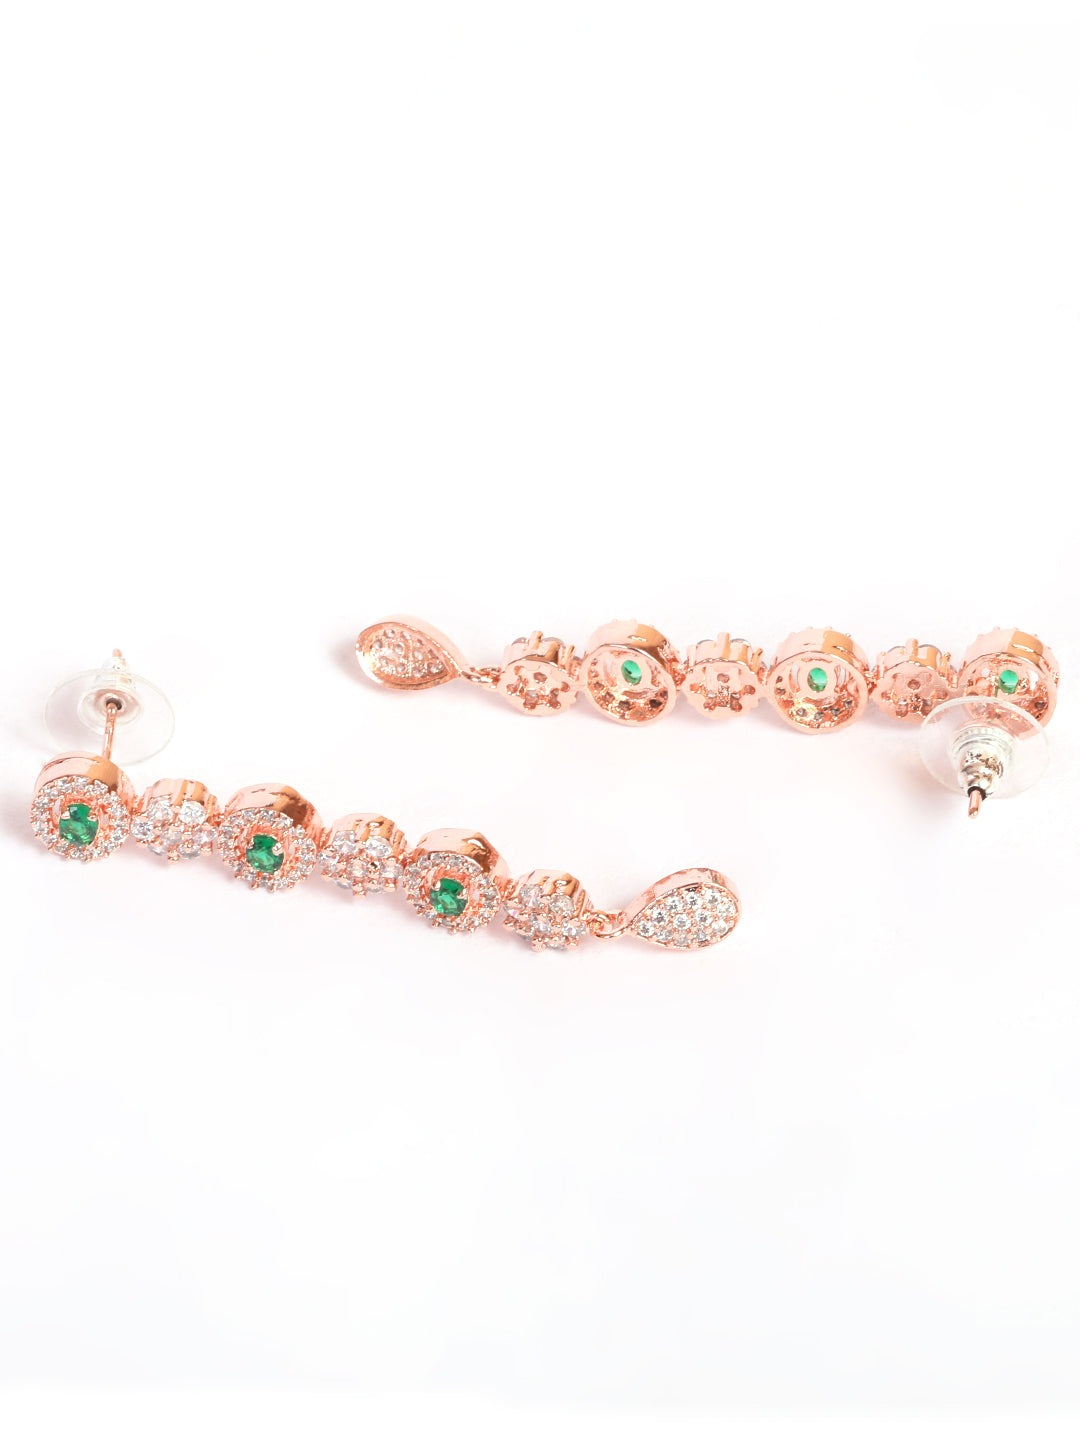 Premium Rose Gold Plated with sparkling Green and White CZ stones designer Necklace Set 8947N